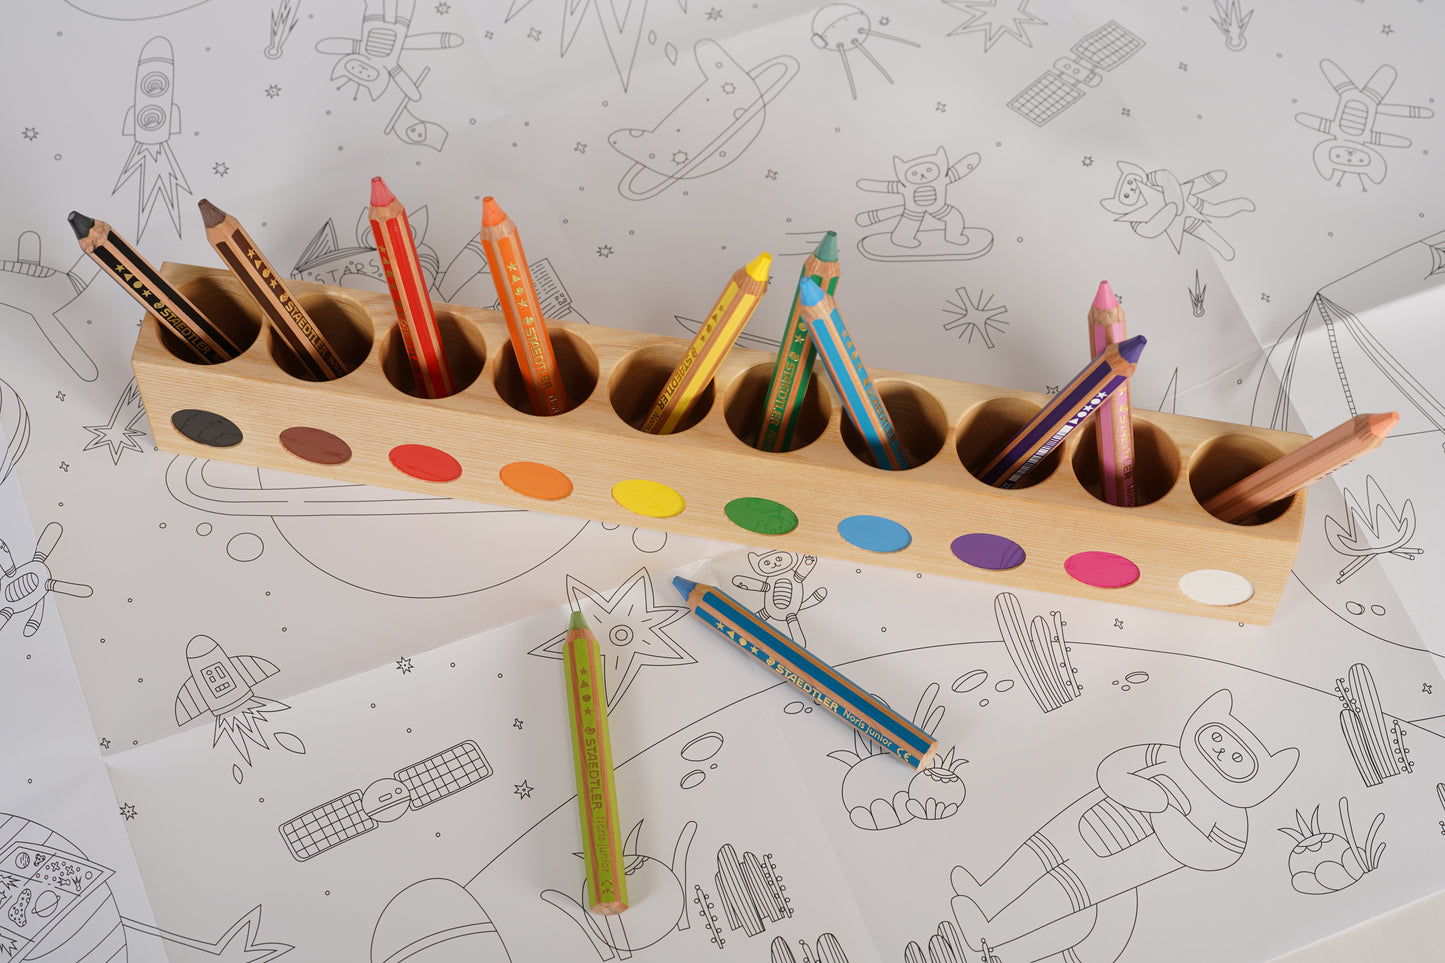 Large montessori pencil holder, with staedtler noris pencils for small kids,  on top of space kittens giant colorig poster